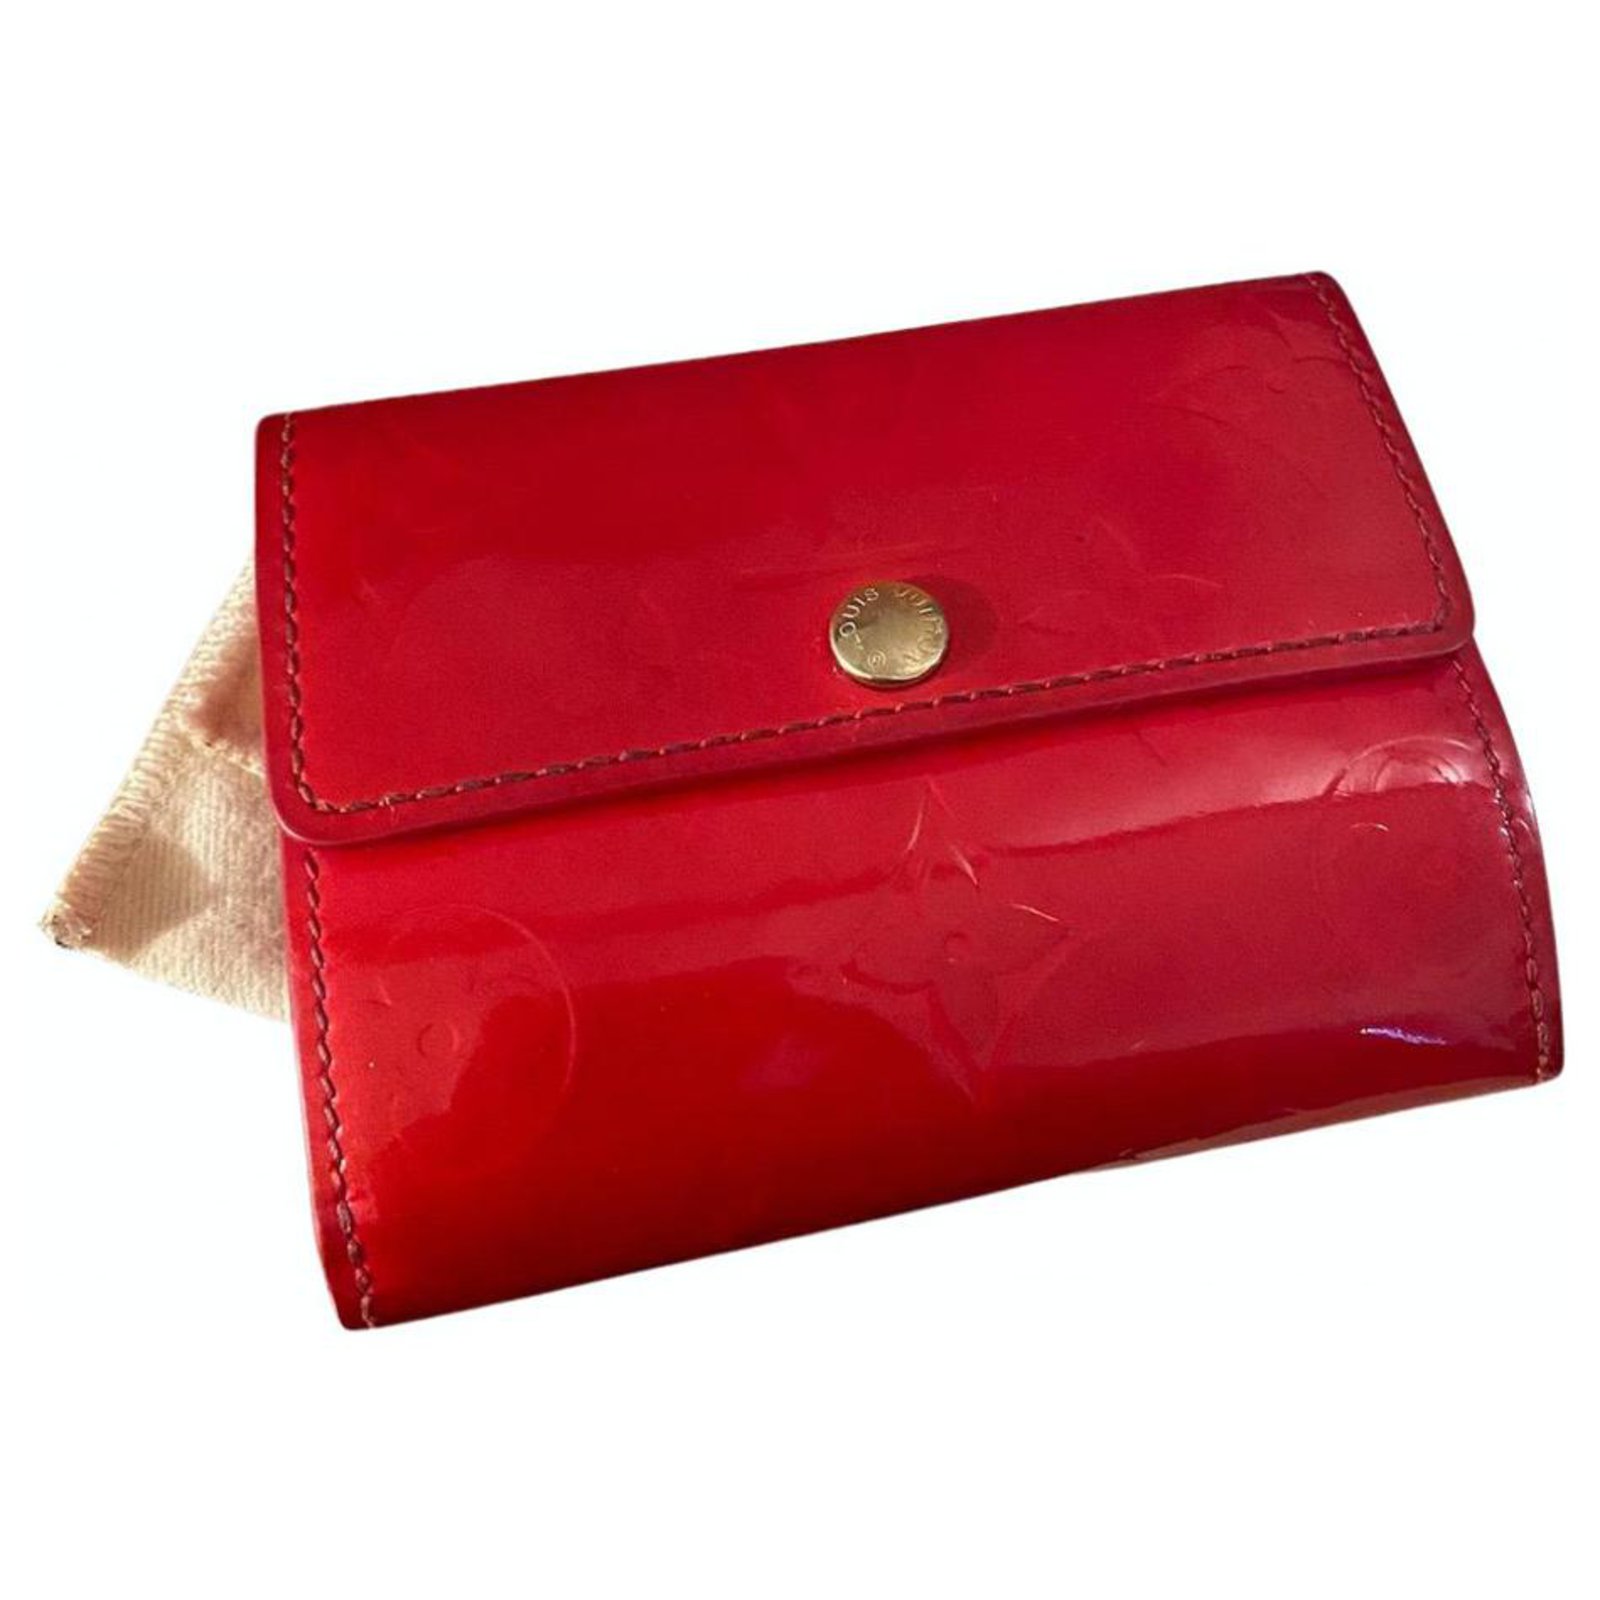 Mandara Louis Vuitton Vermilion Red Coin Purse in Patent Leather